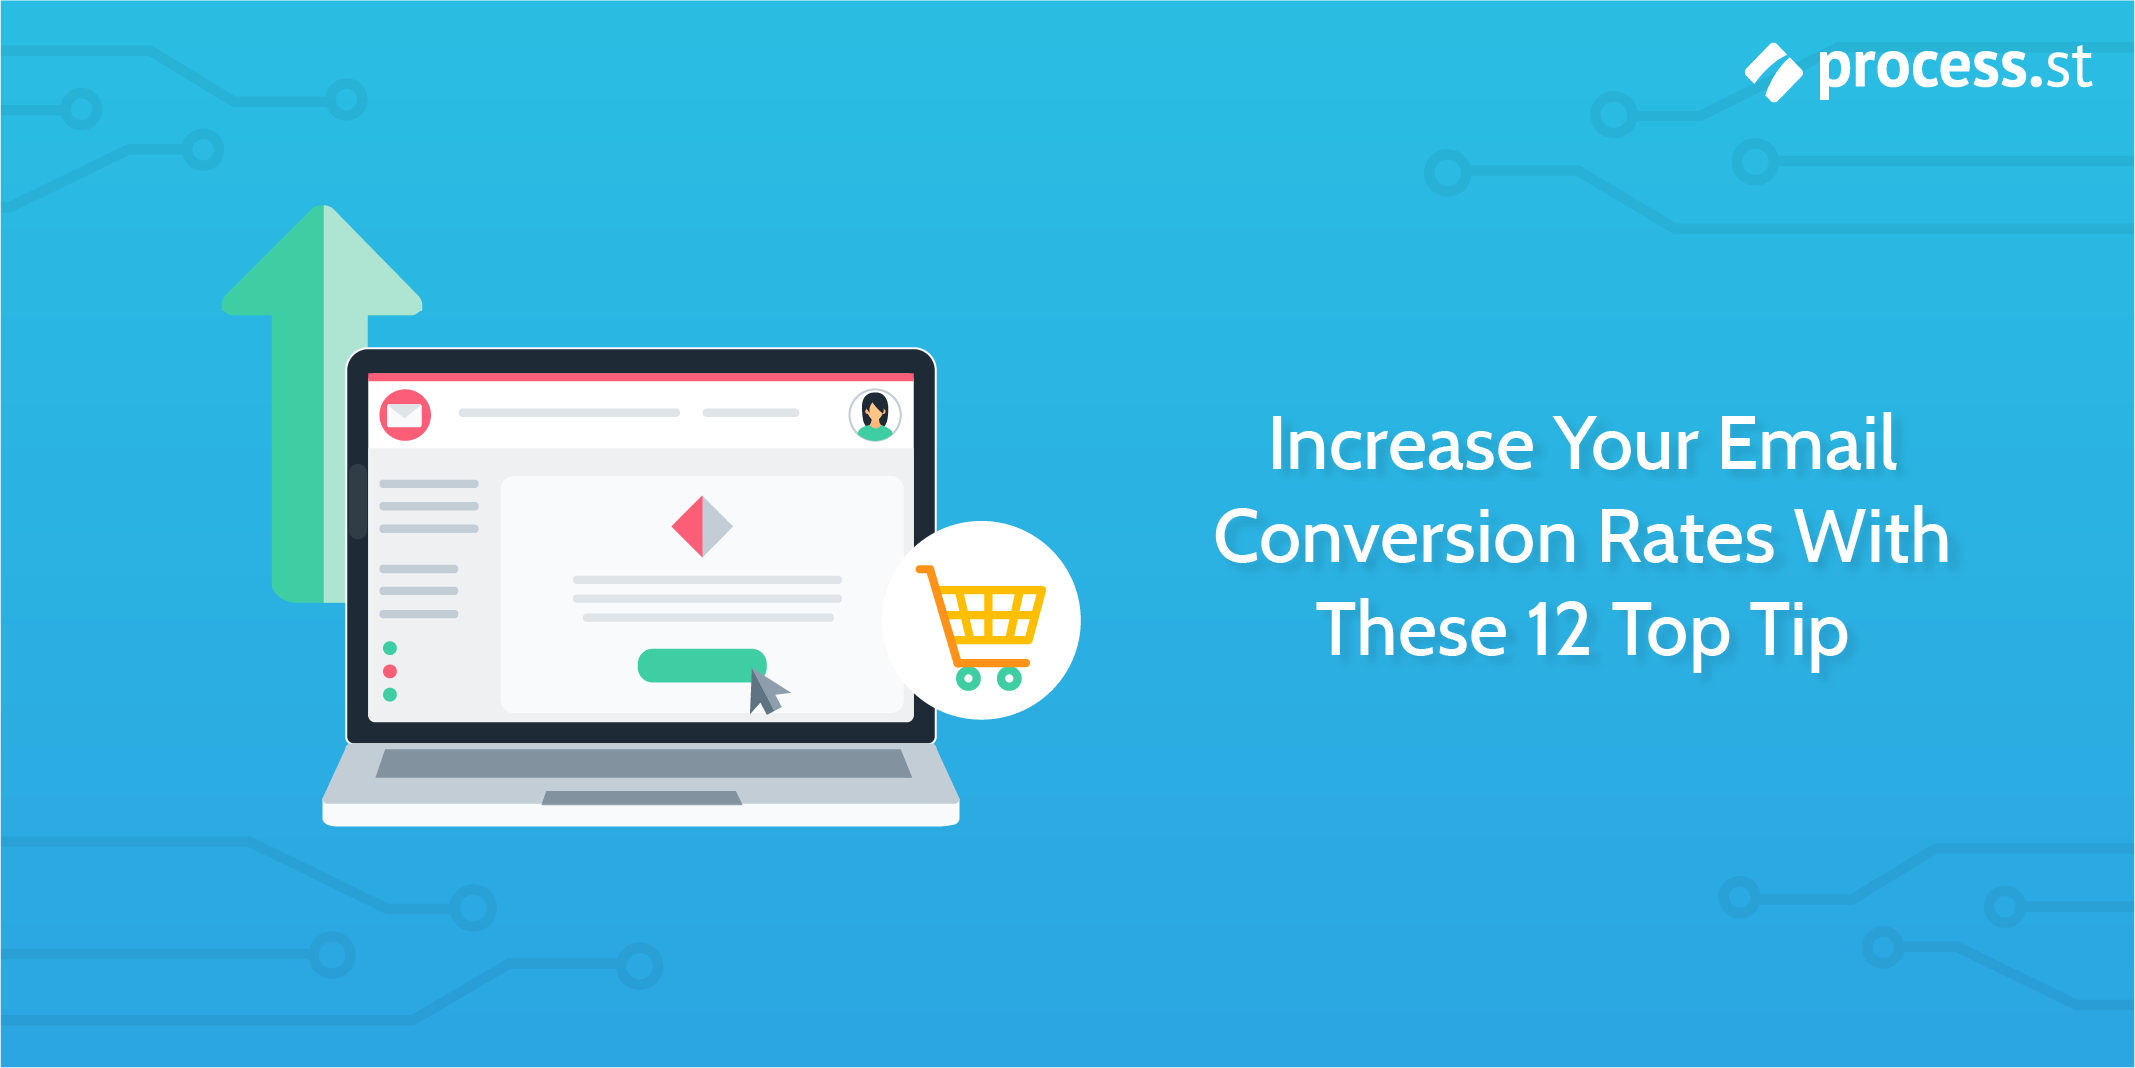 Increase Your Email Conversion Rates With These 12 Top Tip-Rev02-05